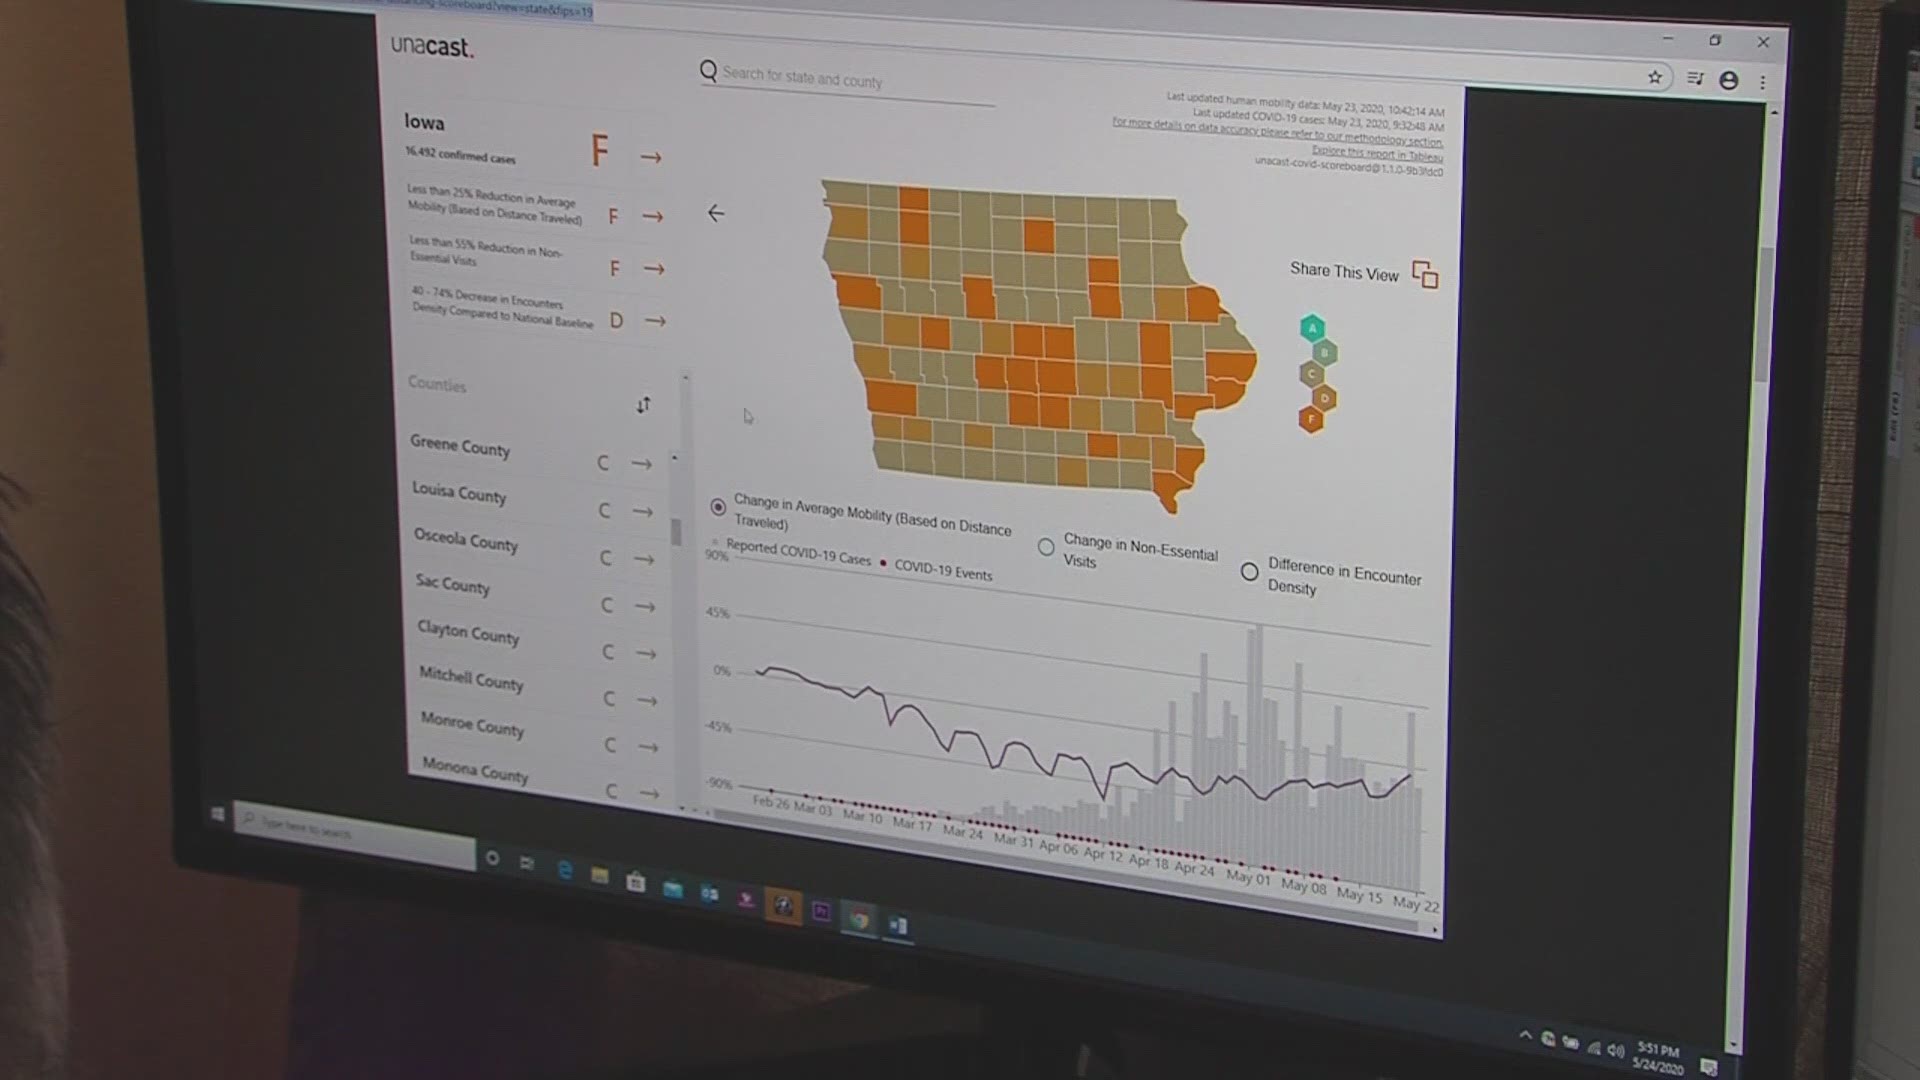 Unacast is a software company that grades by using cell phone location data that tracks movements. Based on the data gathered, Iowa gets an F in social distancing.